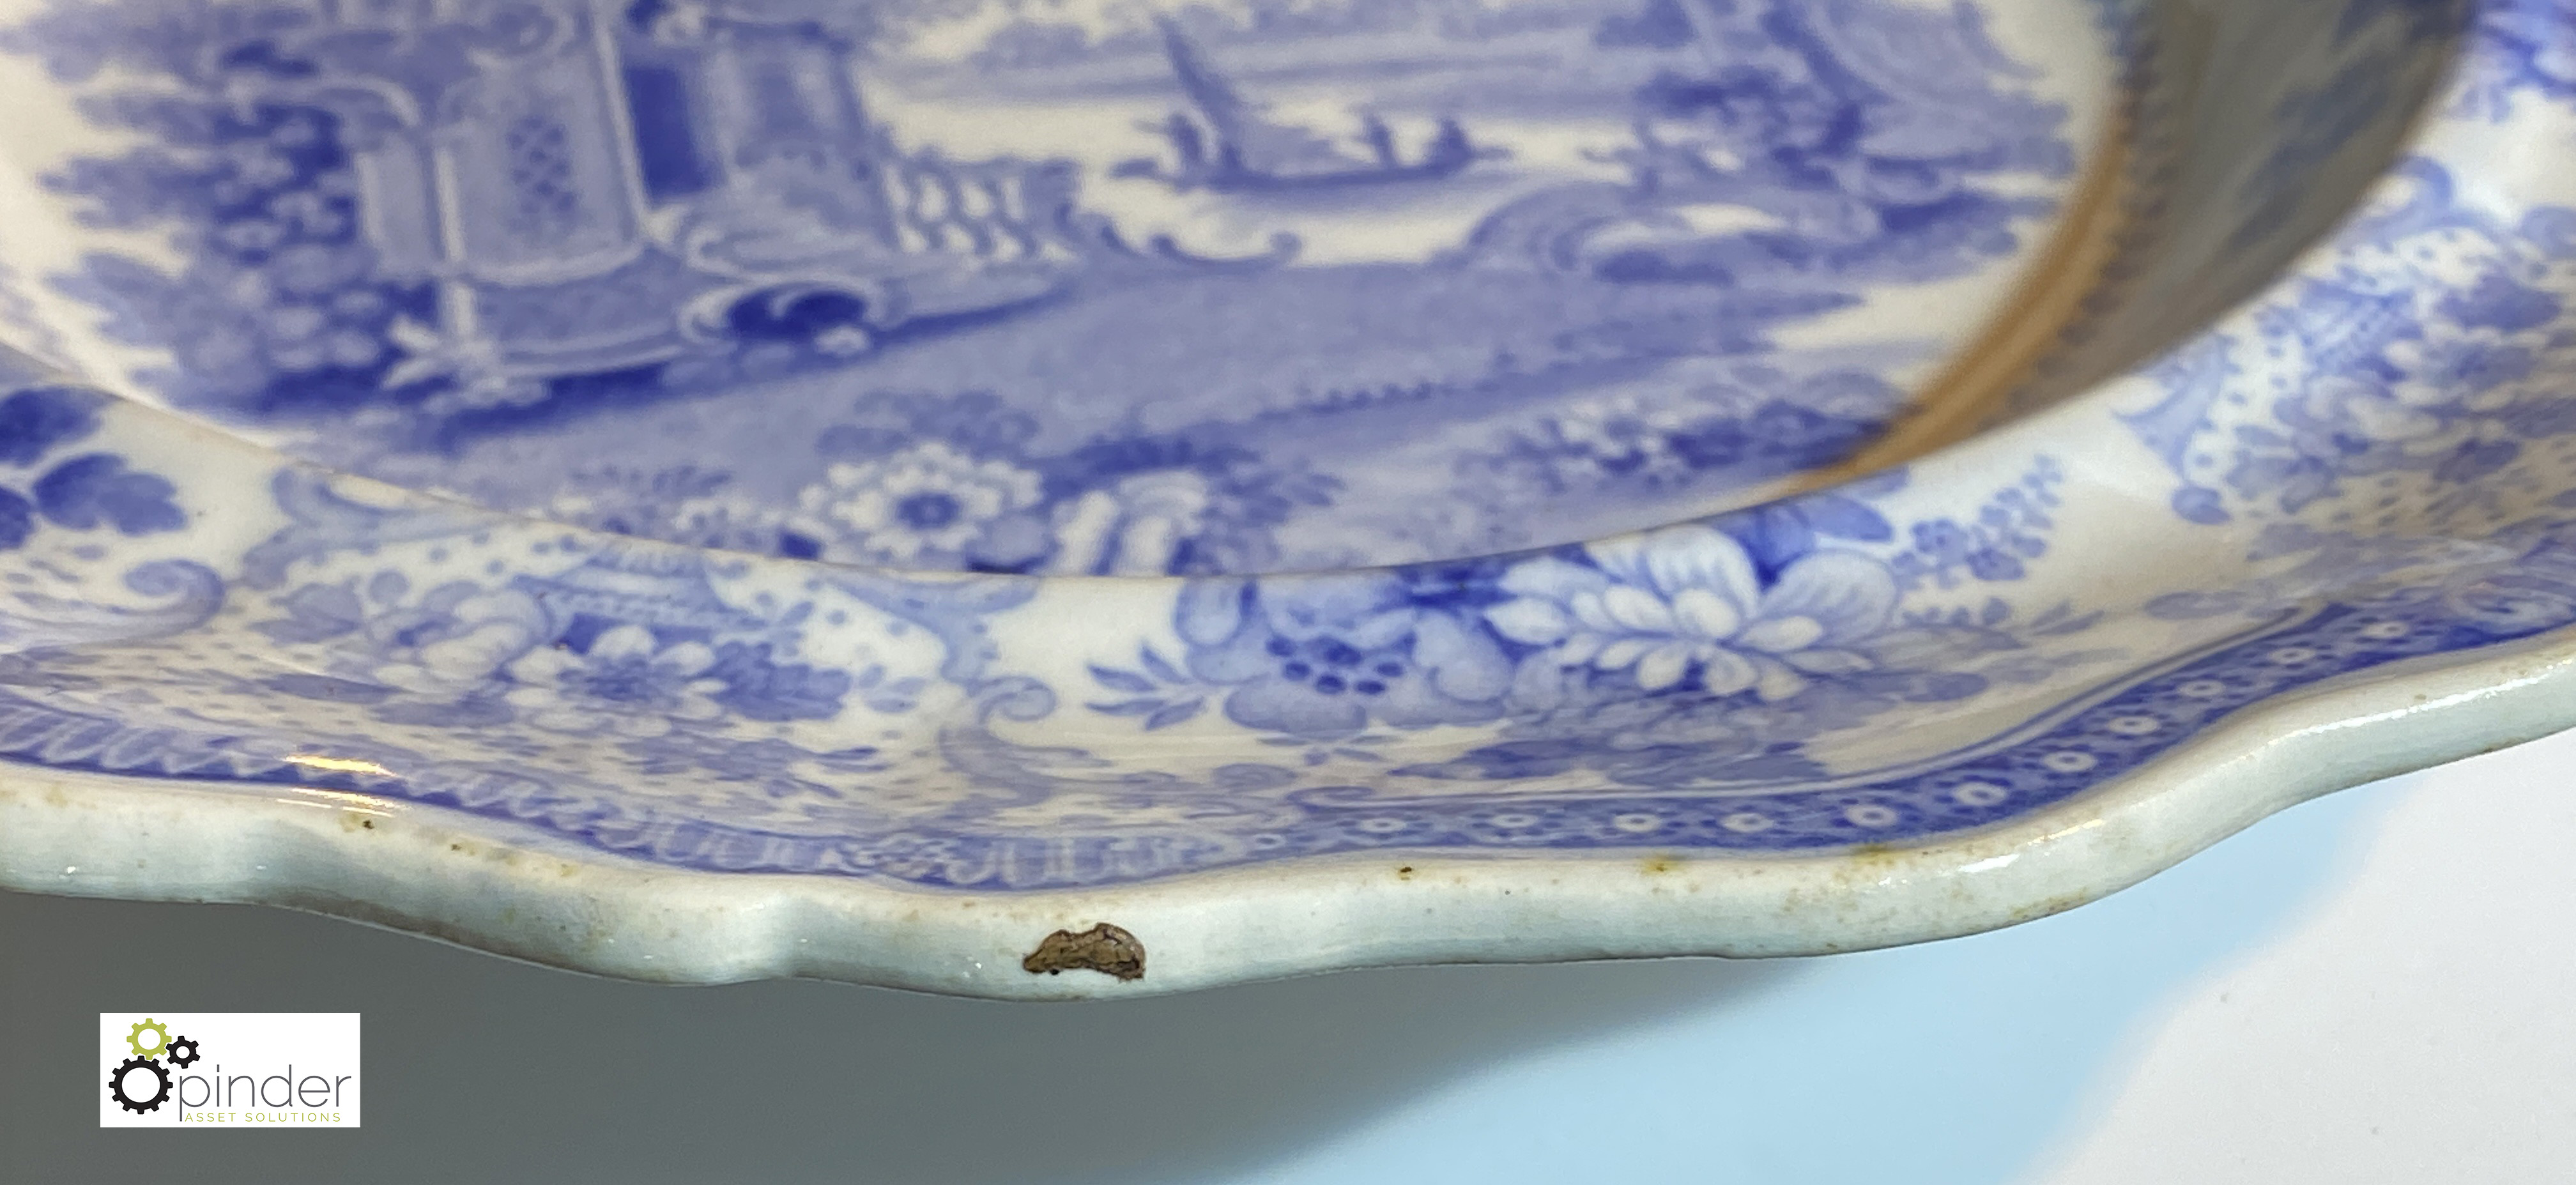 Soup Bowl, Fairy Villas Stone China, circa 1835 (location: Wakefield / collection: Monday 7 March) - Image 3 of 3